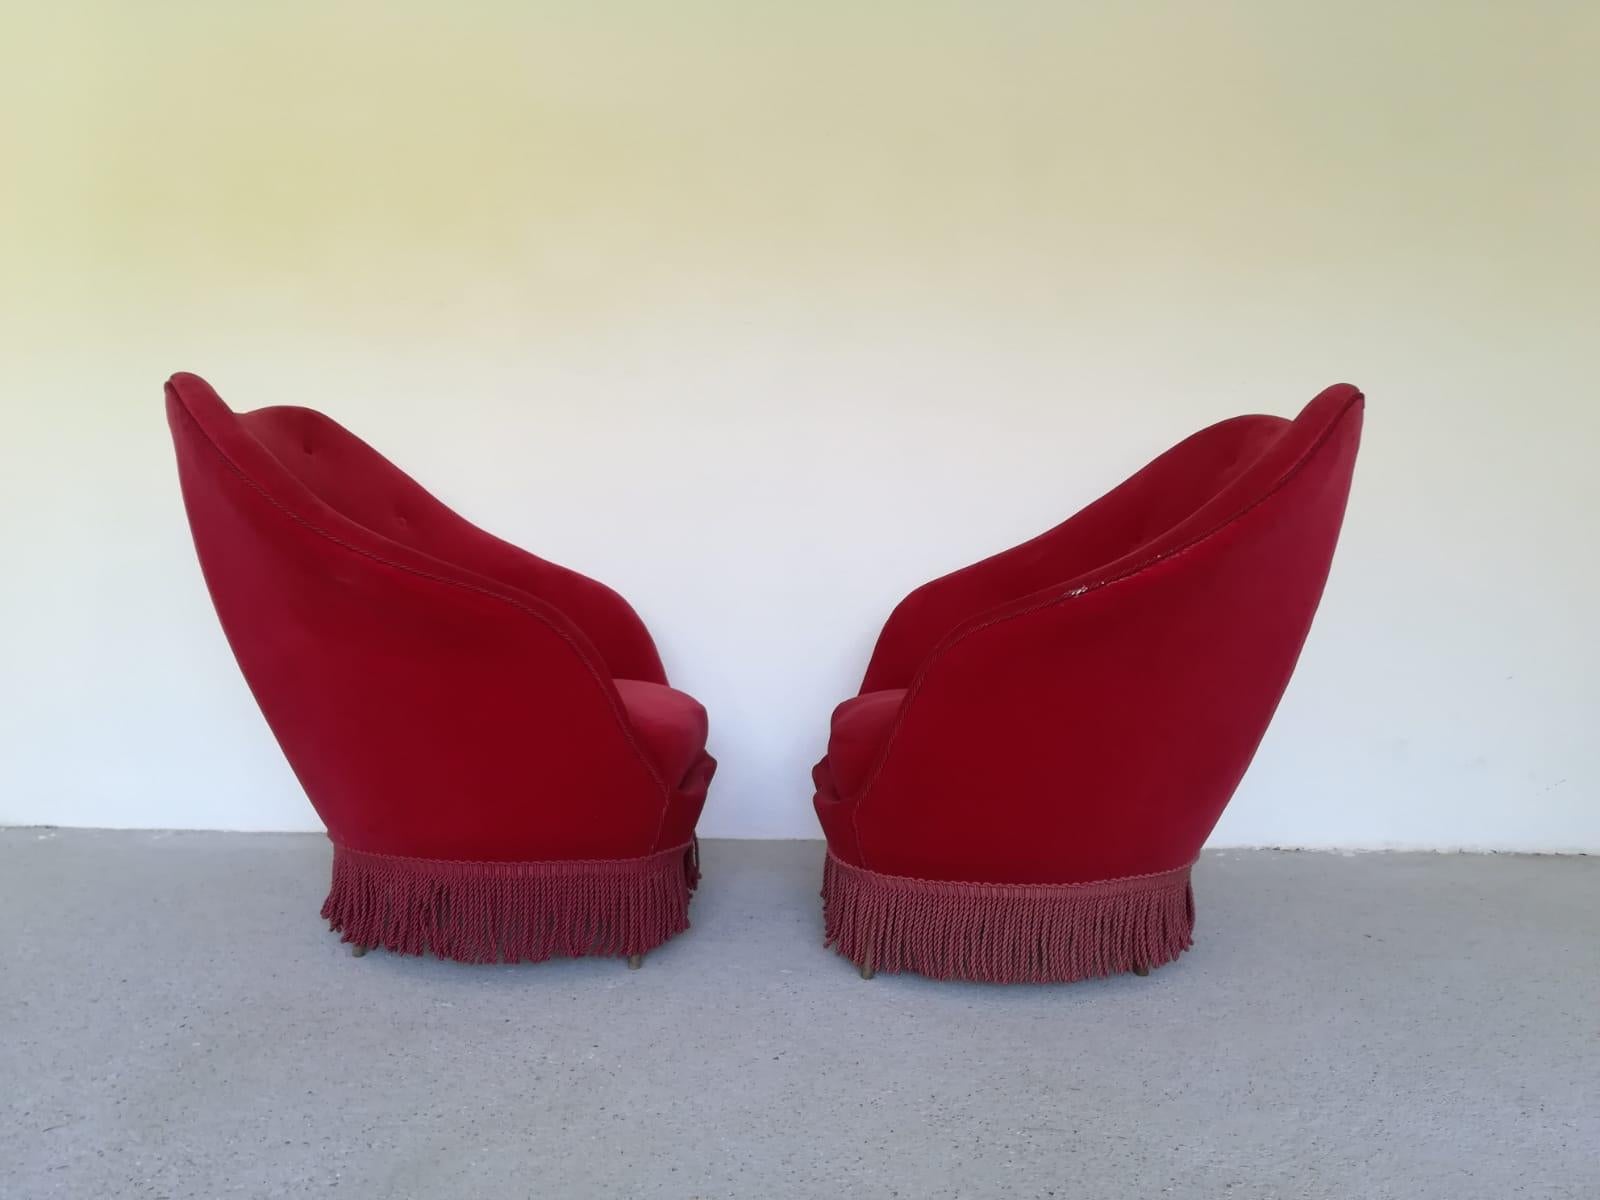 Mid-Century Modern Curvy Comma Armchairs Attr. Ico Parisi, 1950s, Italy, Complimentary Reupholstery